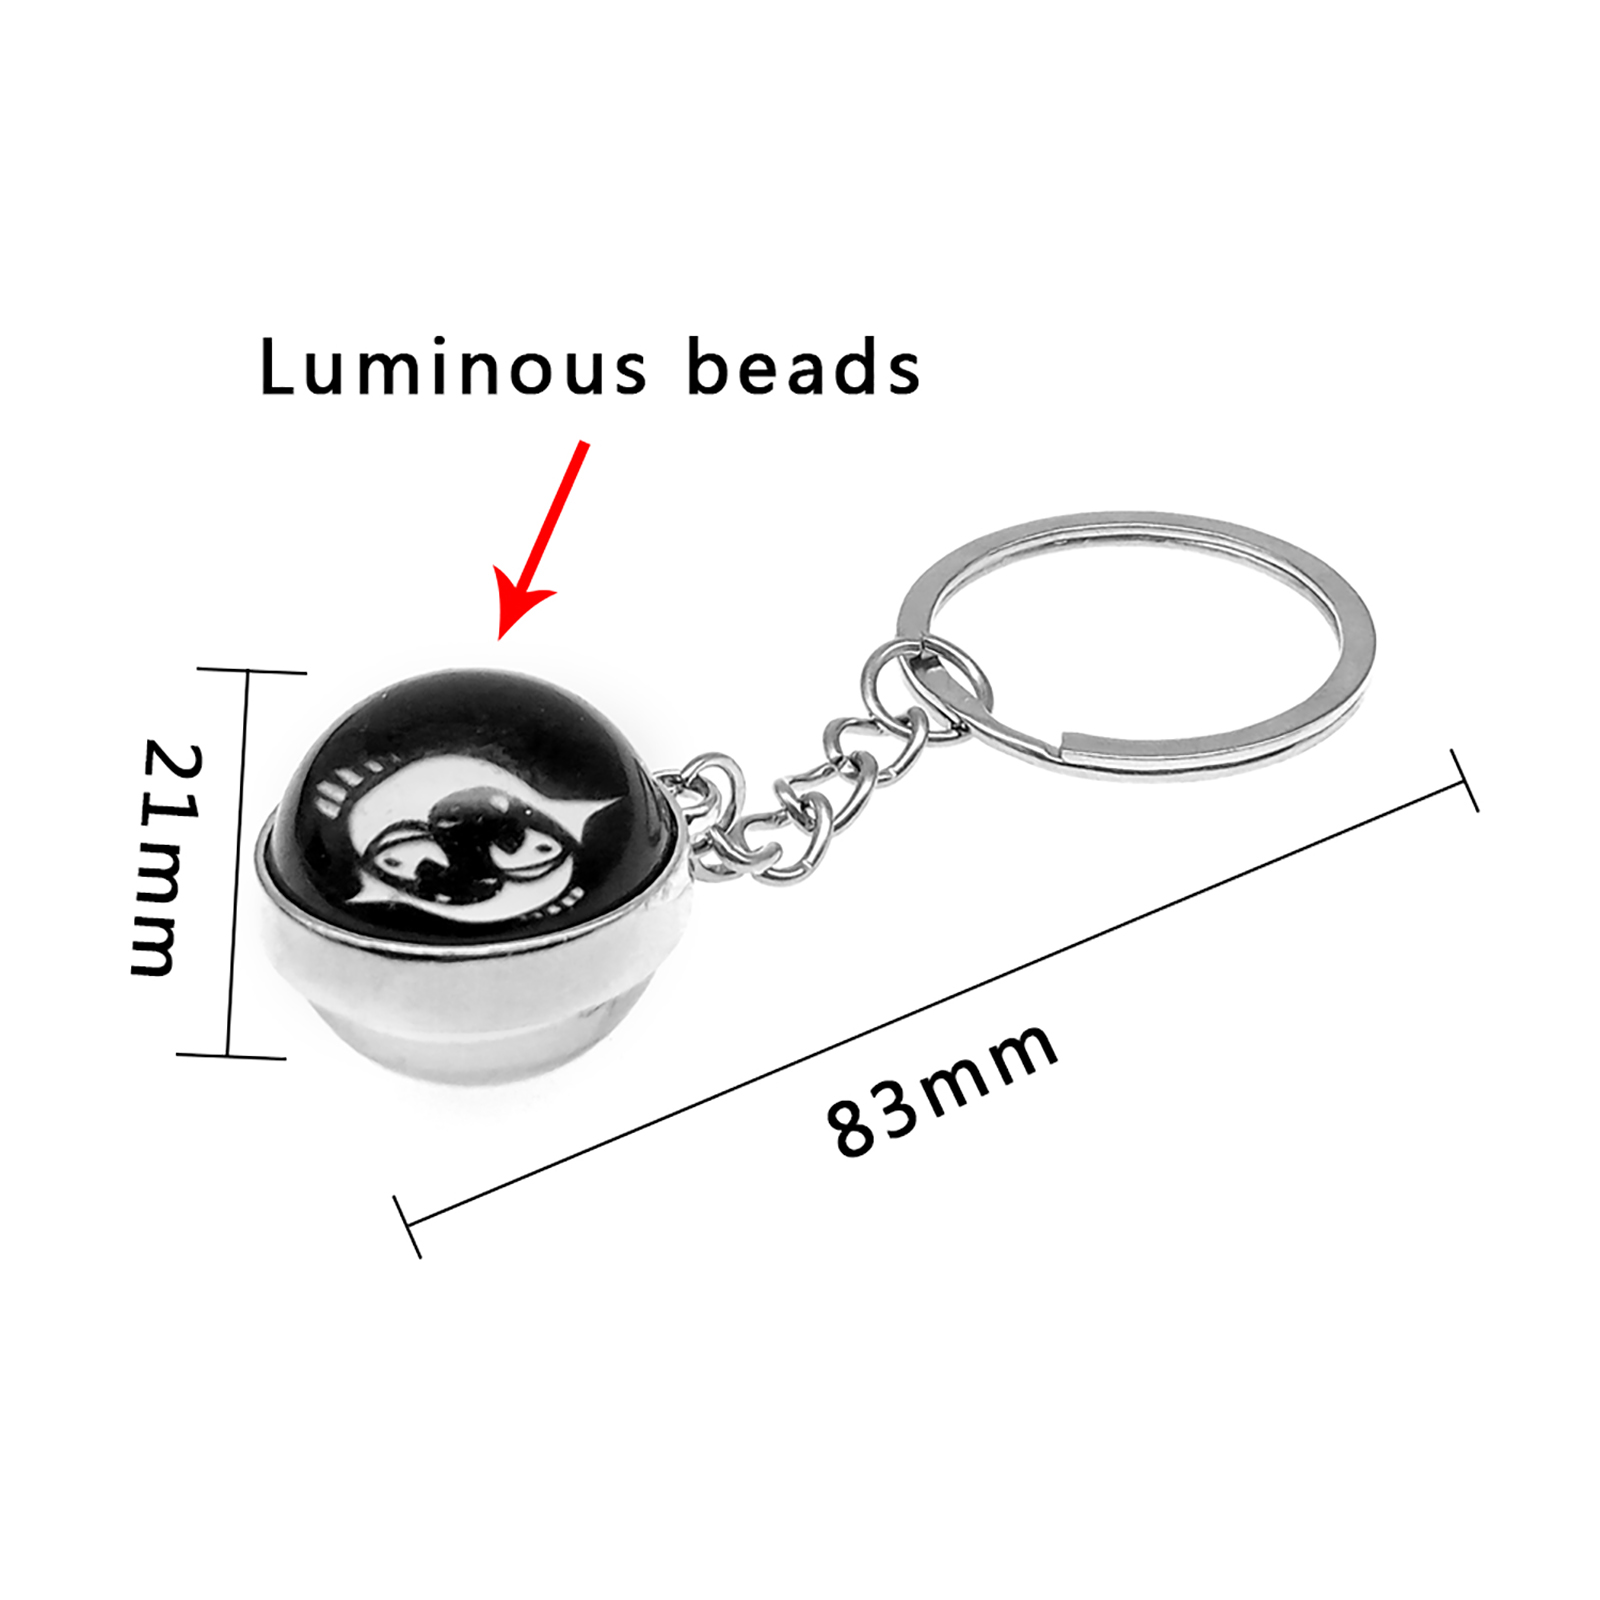 1:The ball is about 20mm, and the keychain is about 80mm long